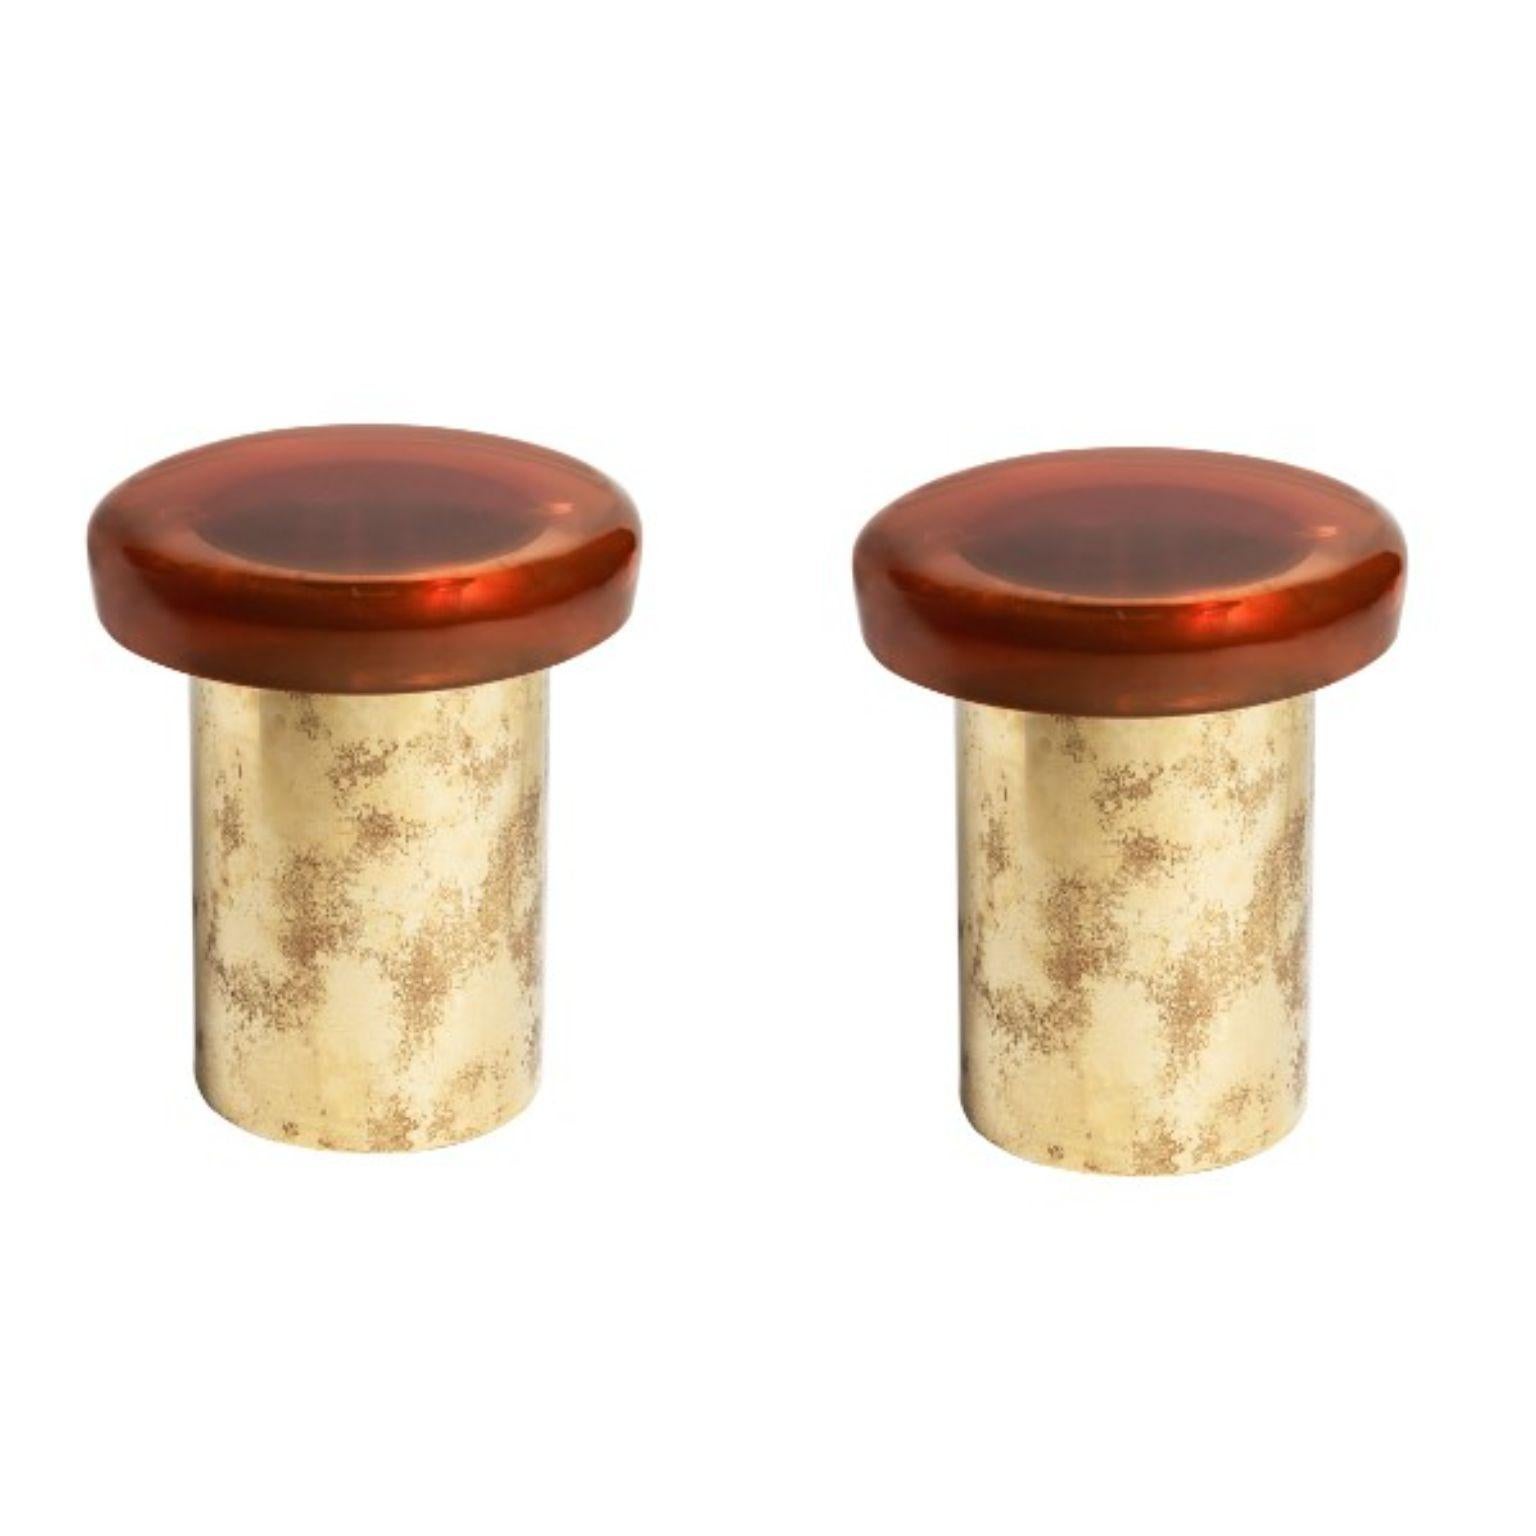 Set of 2 Jade stools by Draga & Aurel
Dimensions: W 40, D 40, H 46, top Ø 40 cm
Materials: Resin and bronze

Formed from a combination of reflective resin and solid brass, the Jade coffee tables look like precious gems. The surface is made by